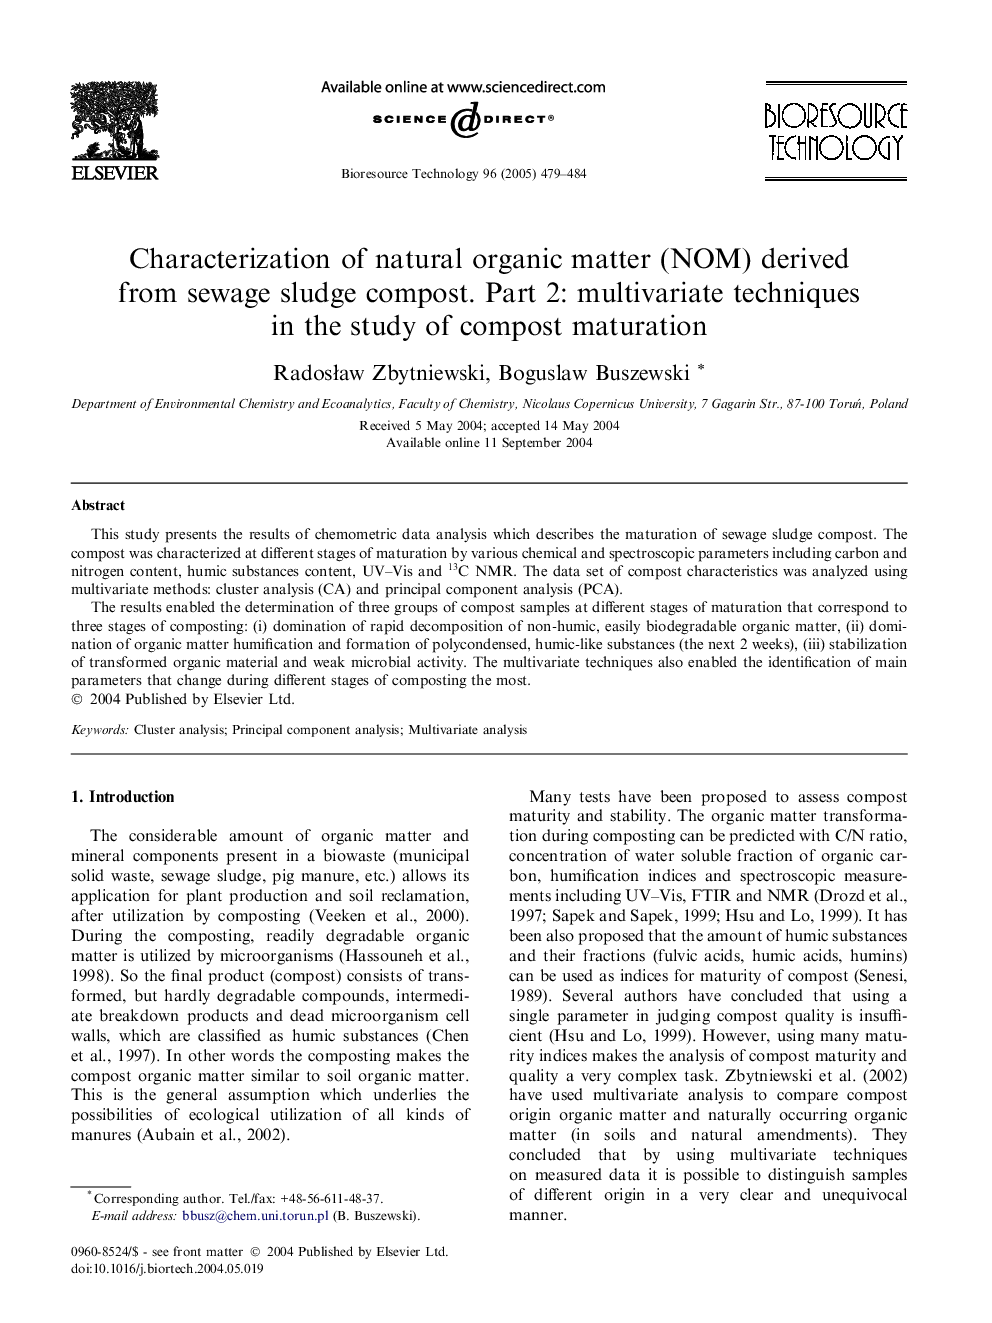 Characterization of natural organic matter (NOM) derived from sewage sludge compost. Part 2: multivariate techniques in the study of compost maturation